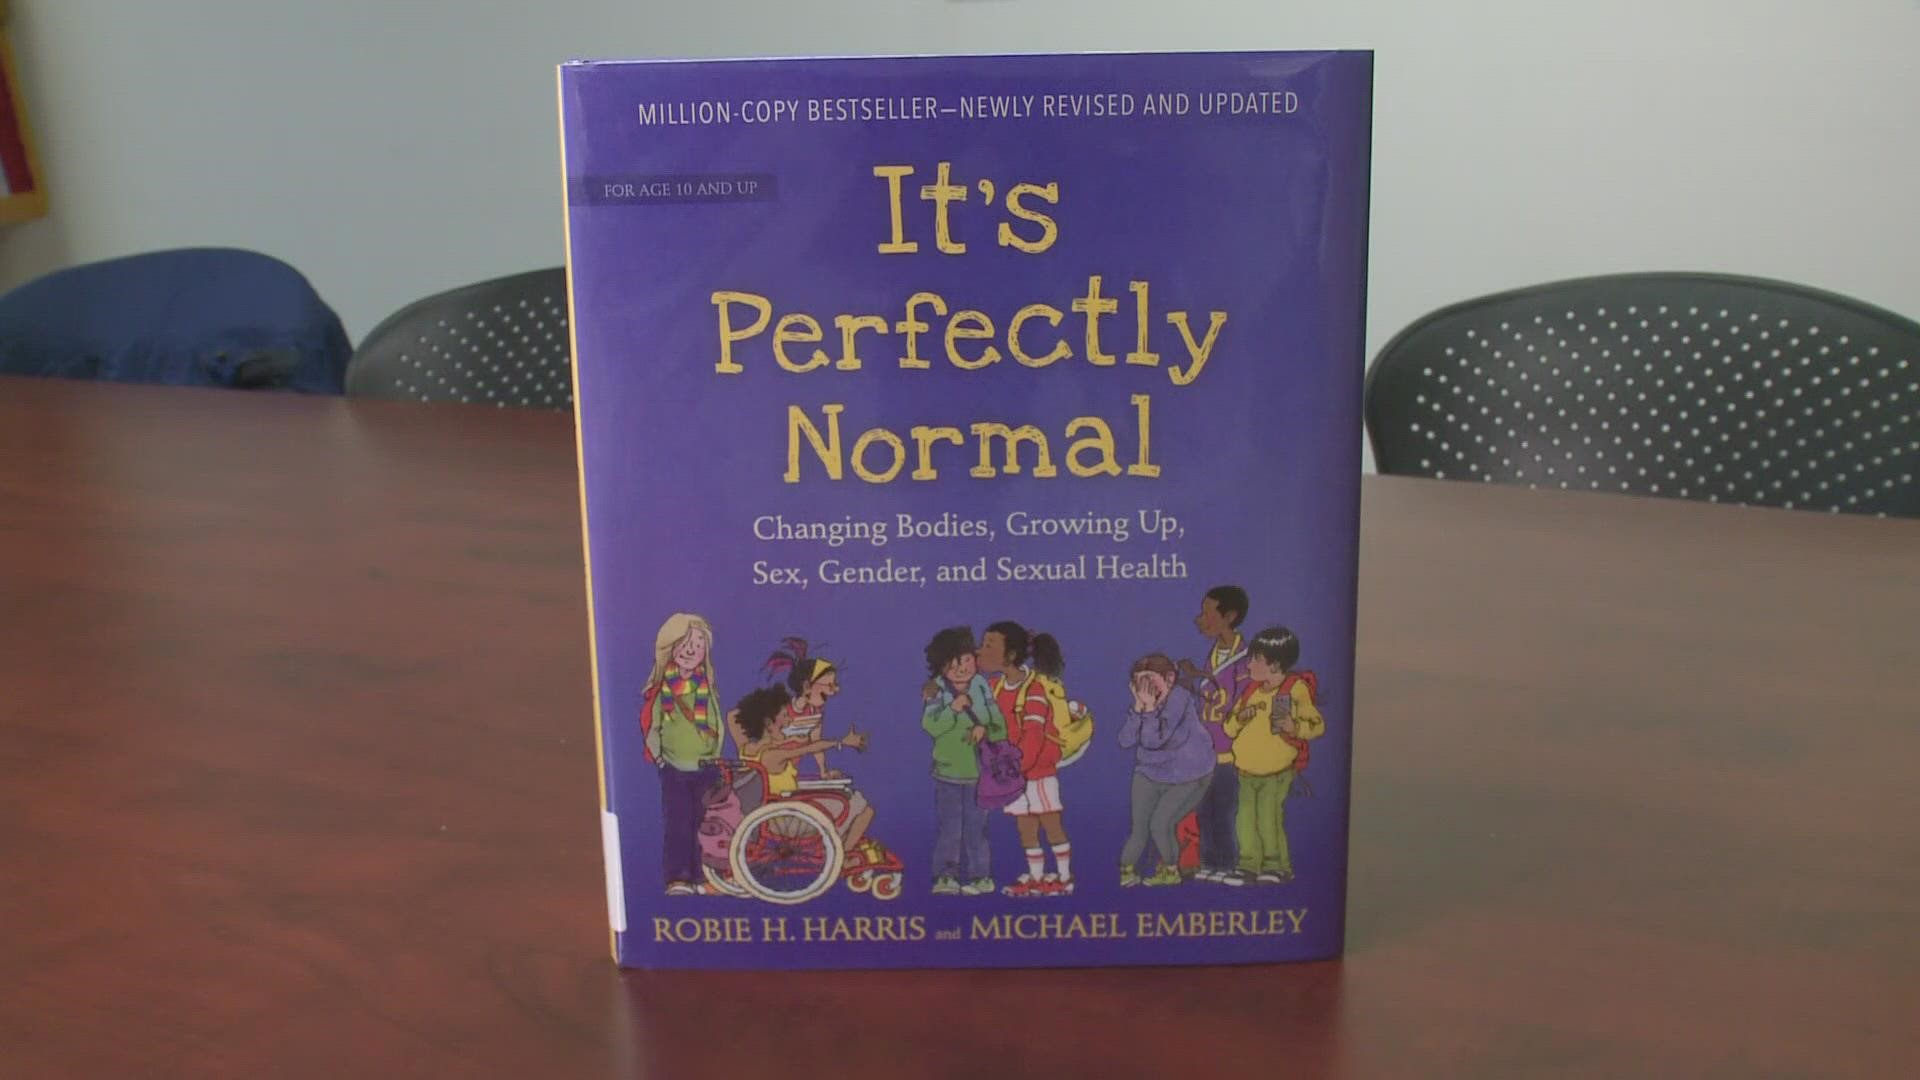 The school committee in York has voted unanimously to uphold the Superintendent's decision to keep the book "It's Perfectly Normal" in the middle school library.